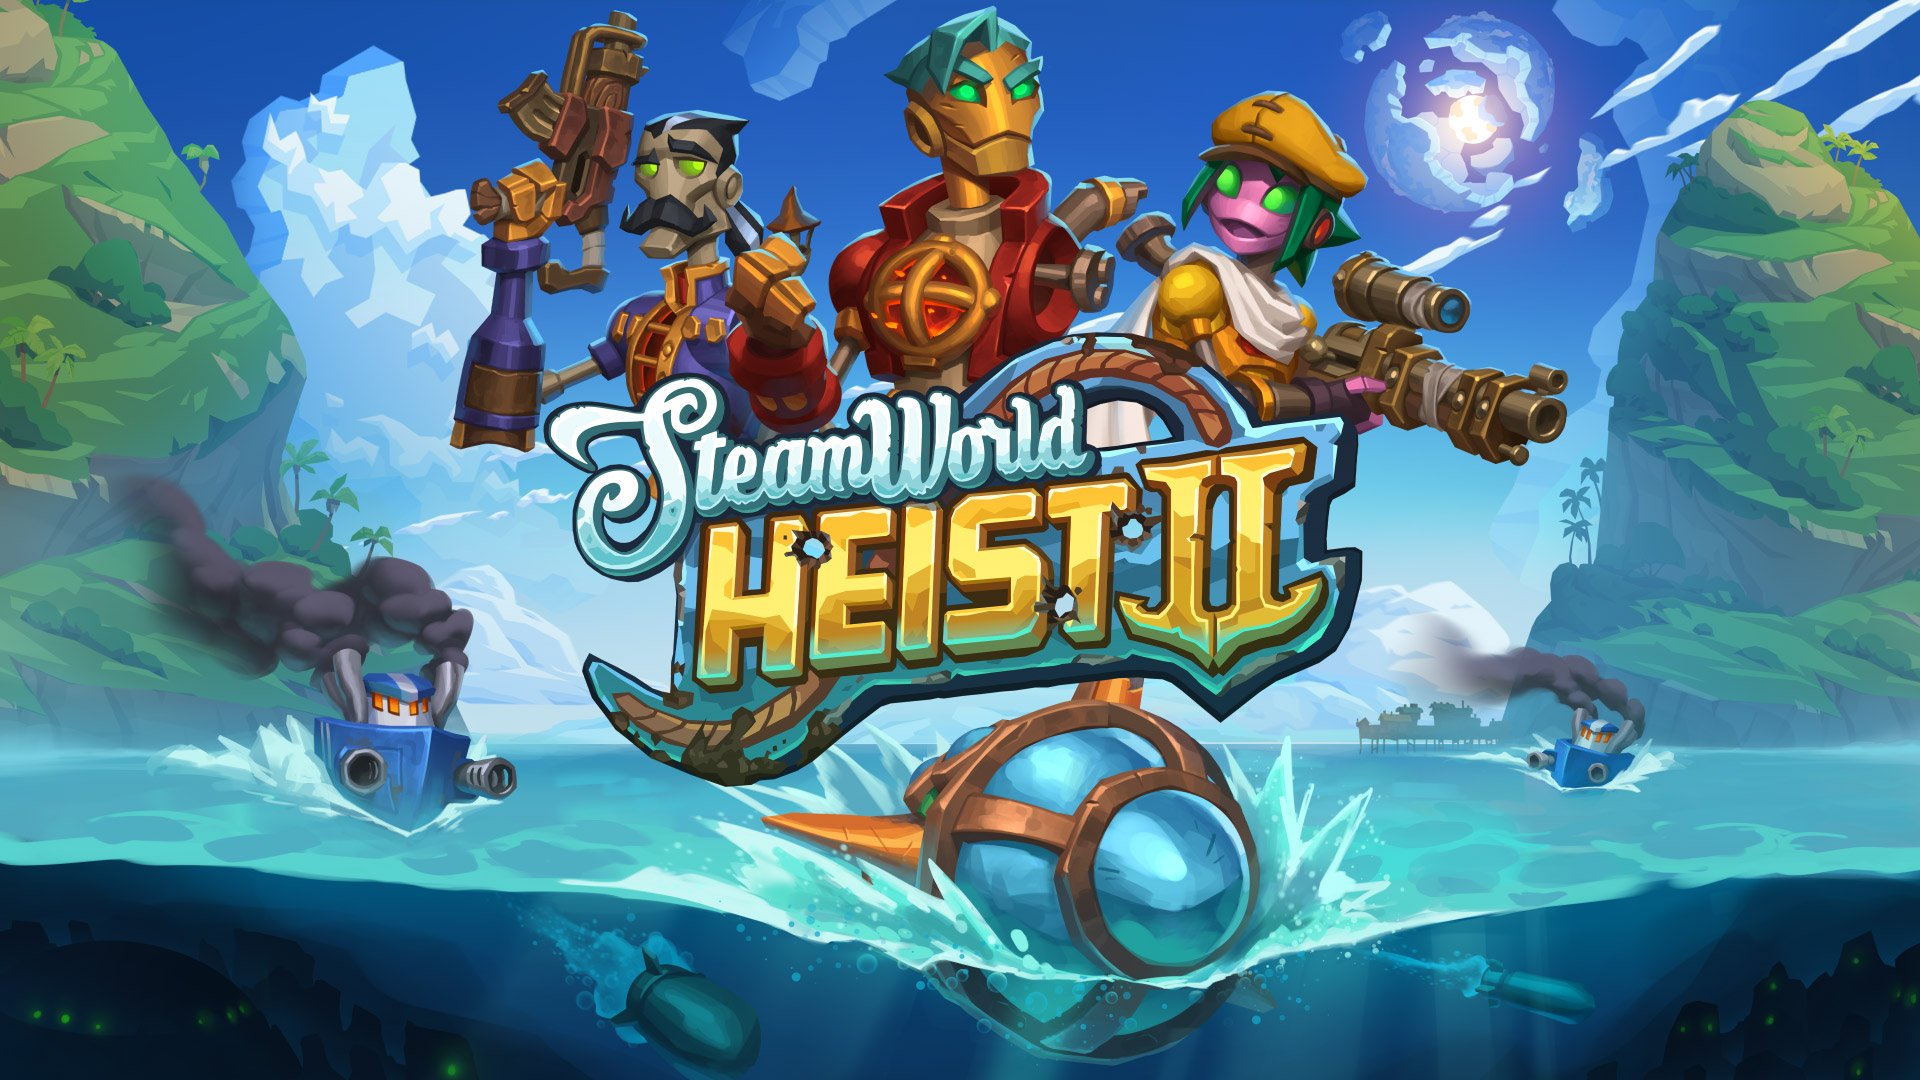 SteamWorld Heist II launched for PS5, Xbox Sequence, PS4, Xbox An individual, Swap, and Laptop